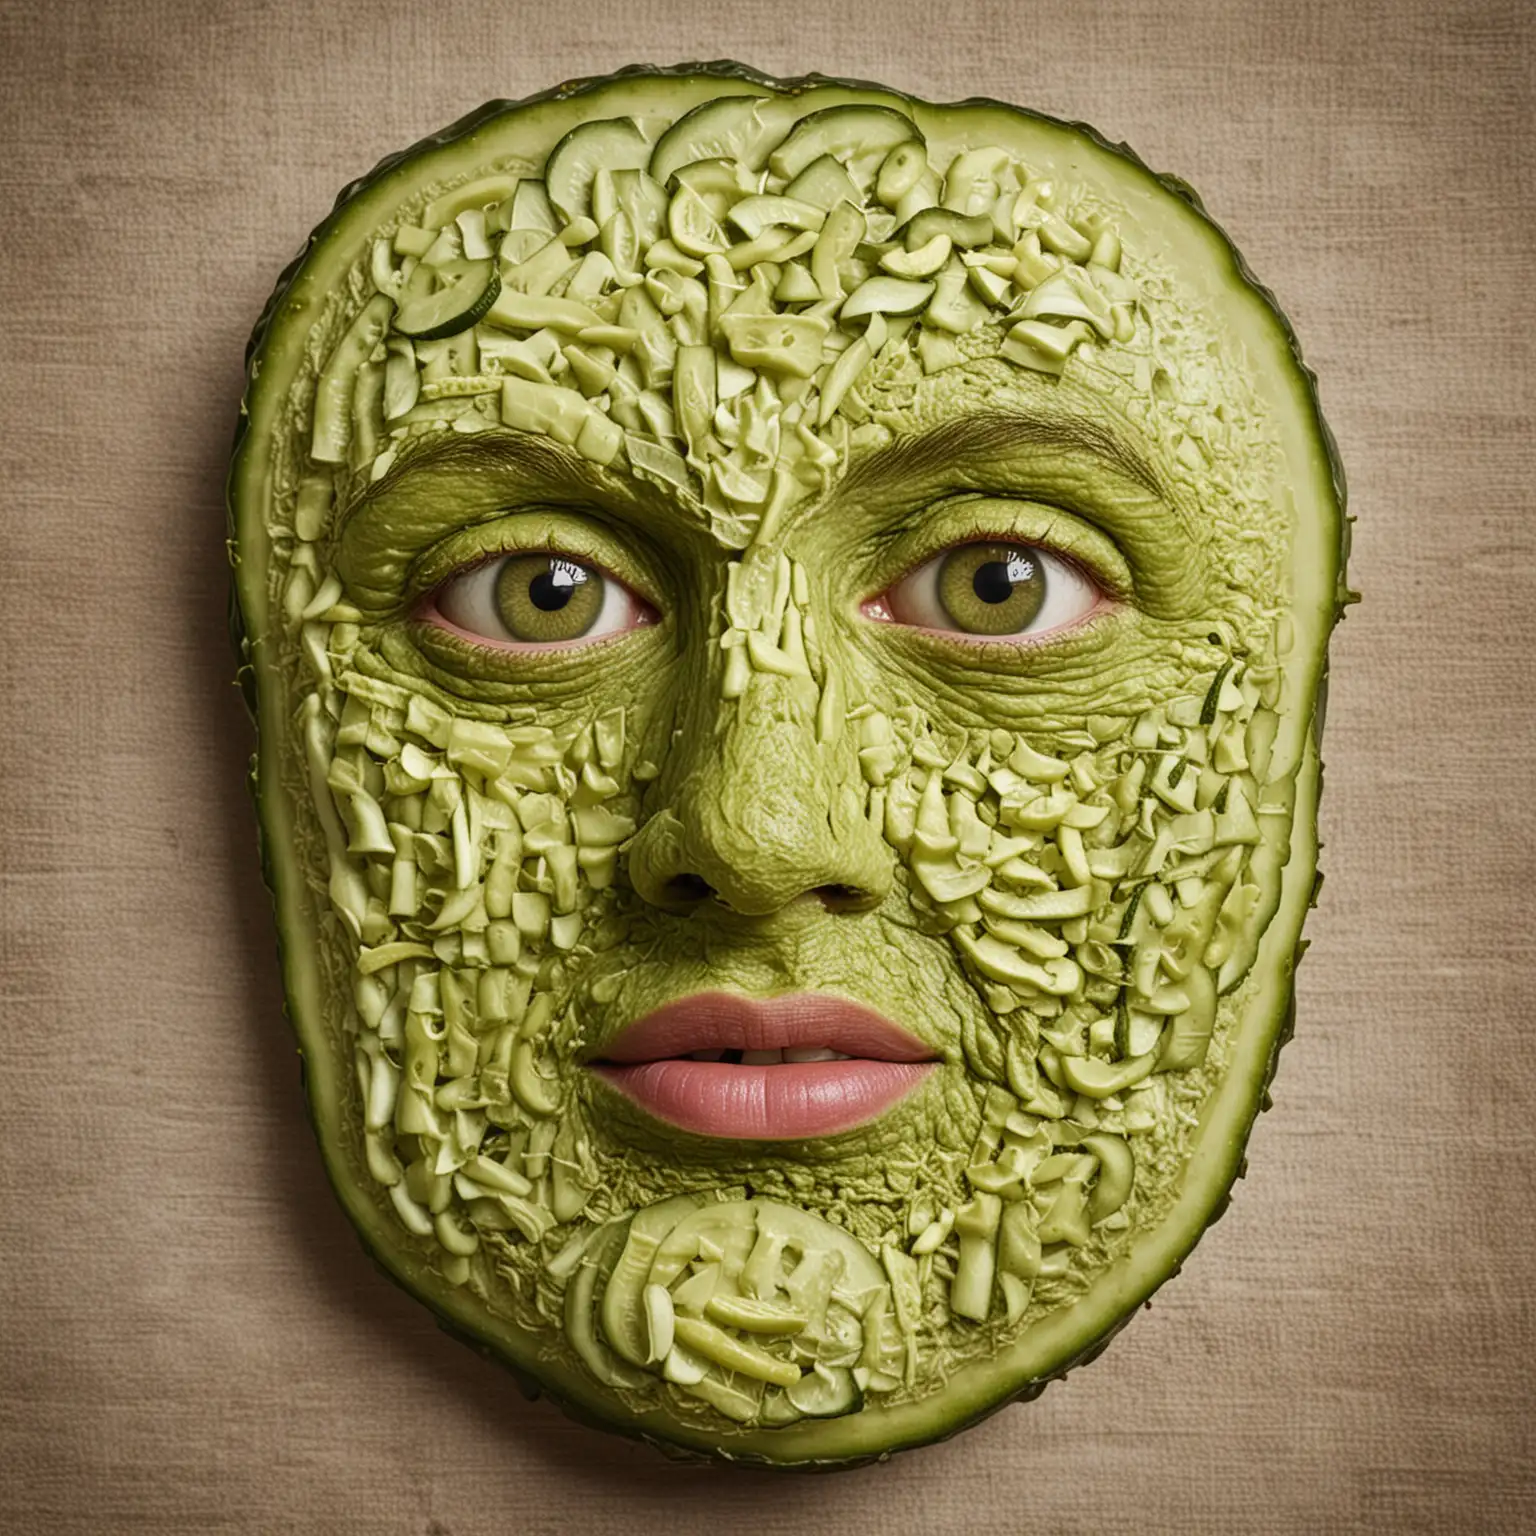 Face made of pickle skin